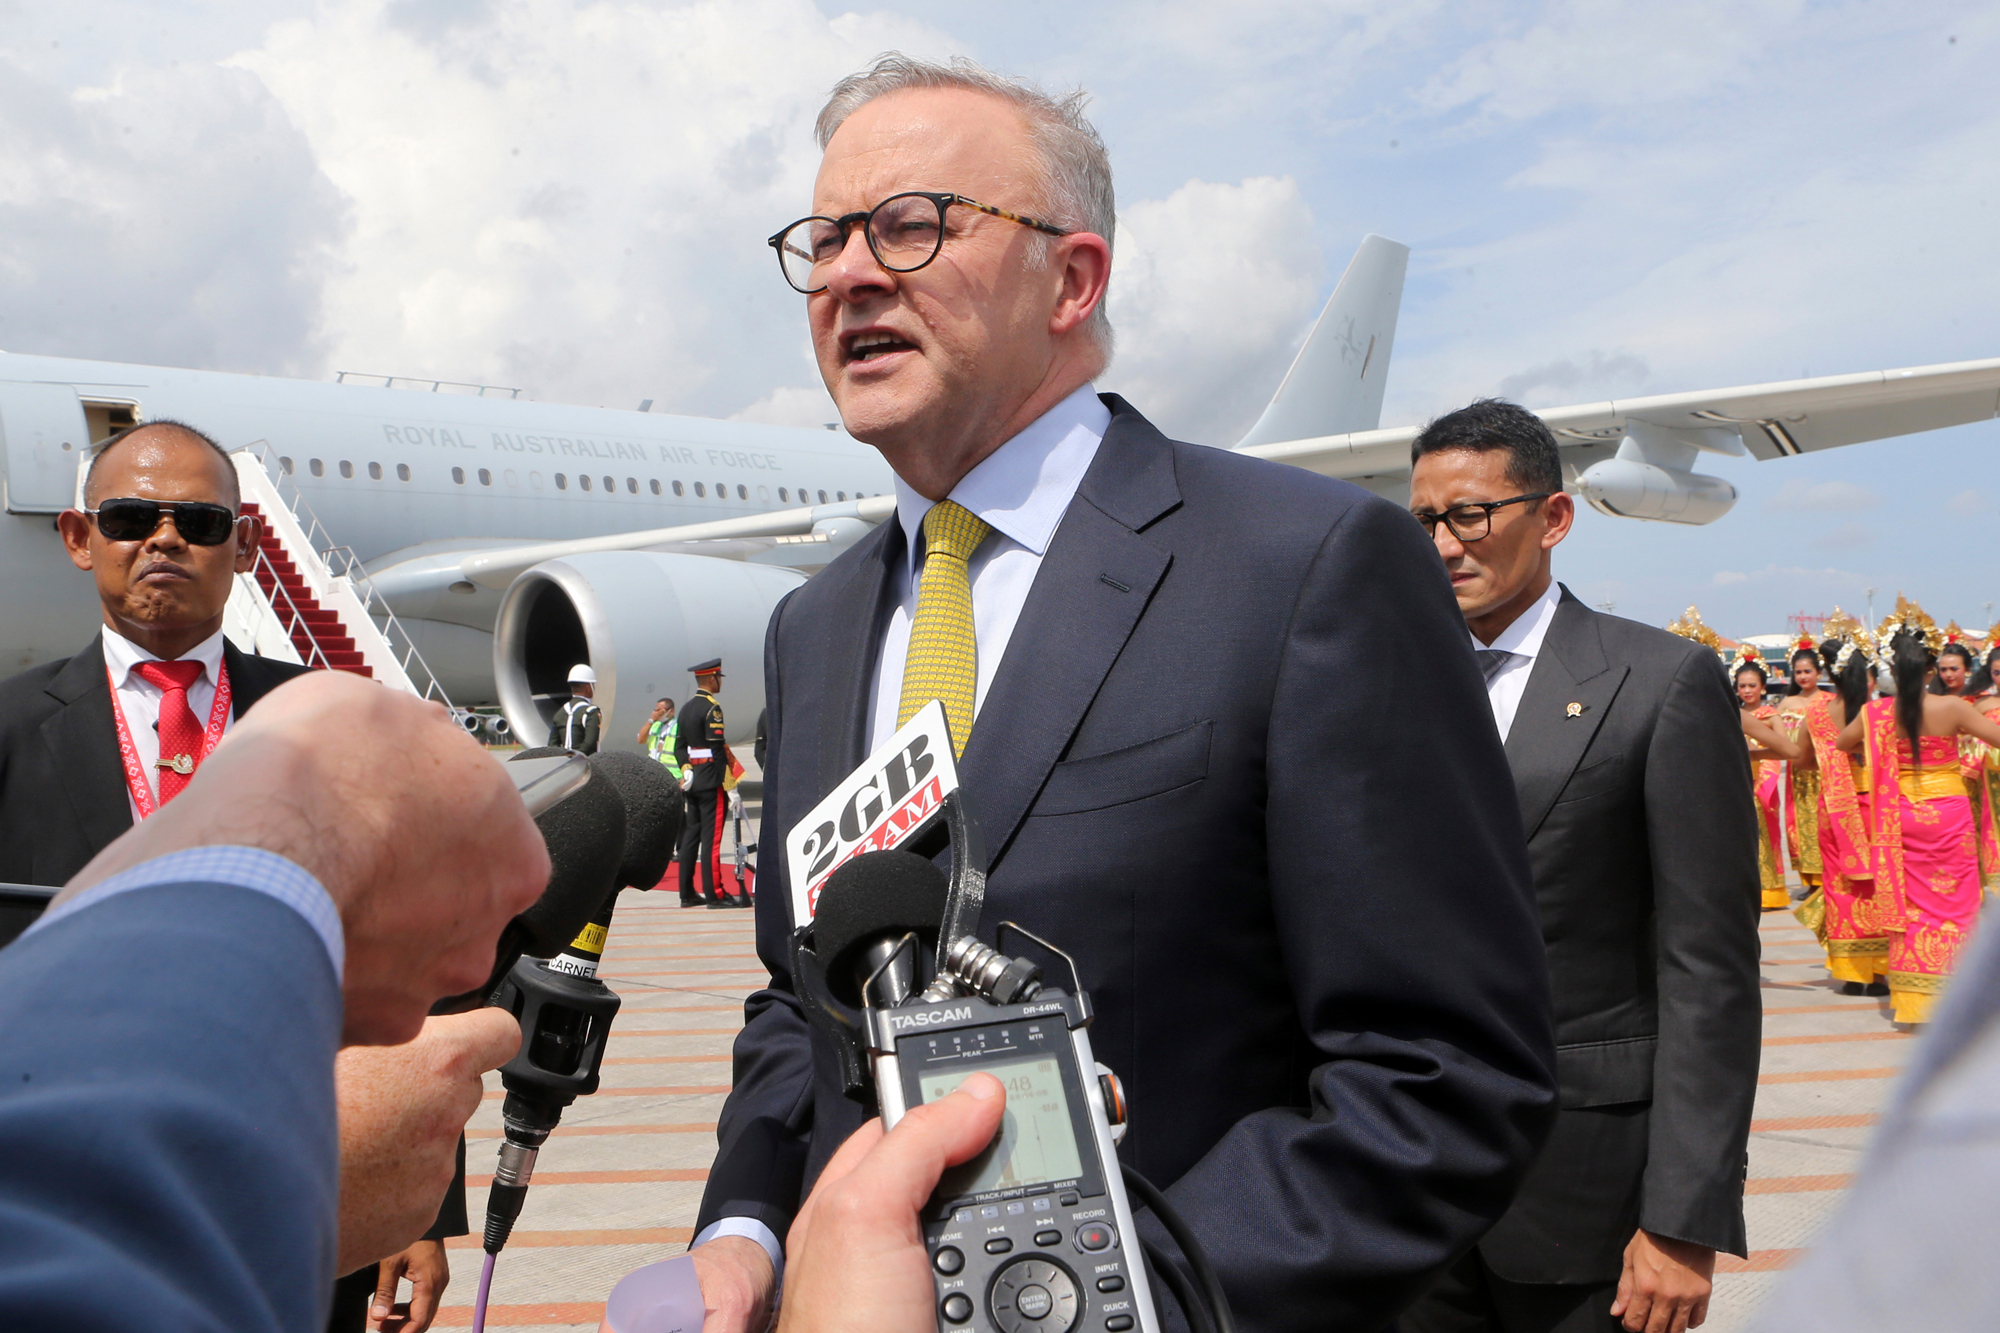 Australian Prime Minister Anthony Albanese talks to the media upon arrival at Ngurah Rai International Airport ahead of the G20 Summit in Bali, Indonesia, on Monday.